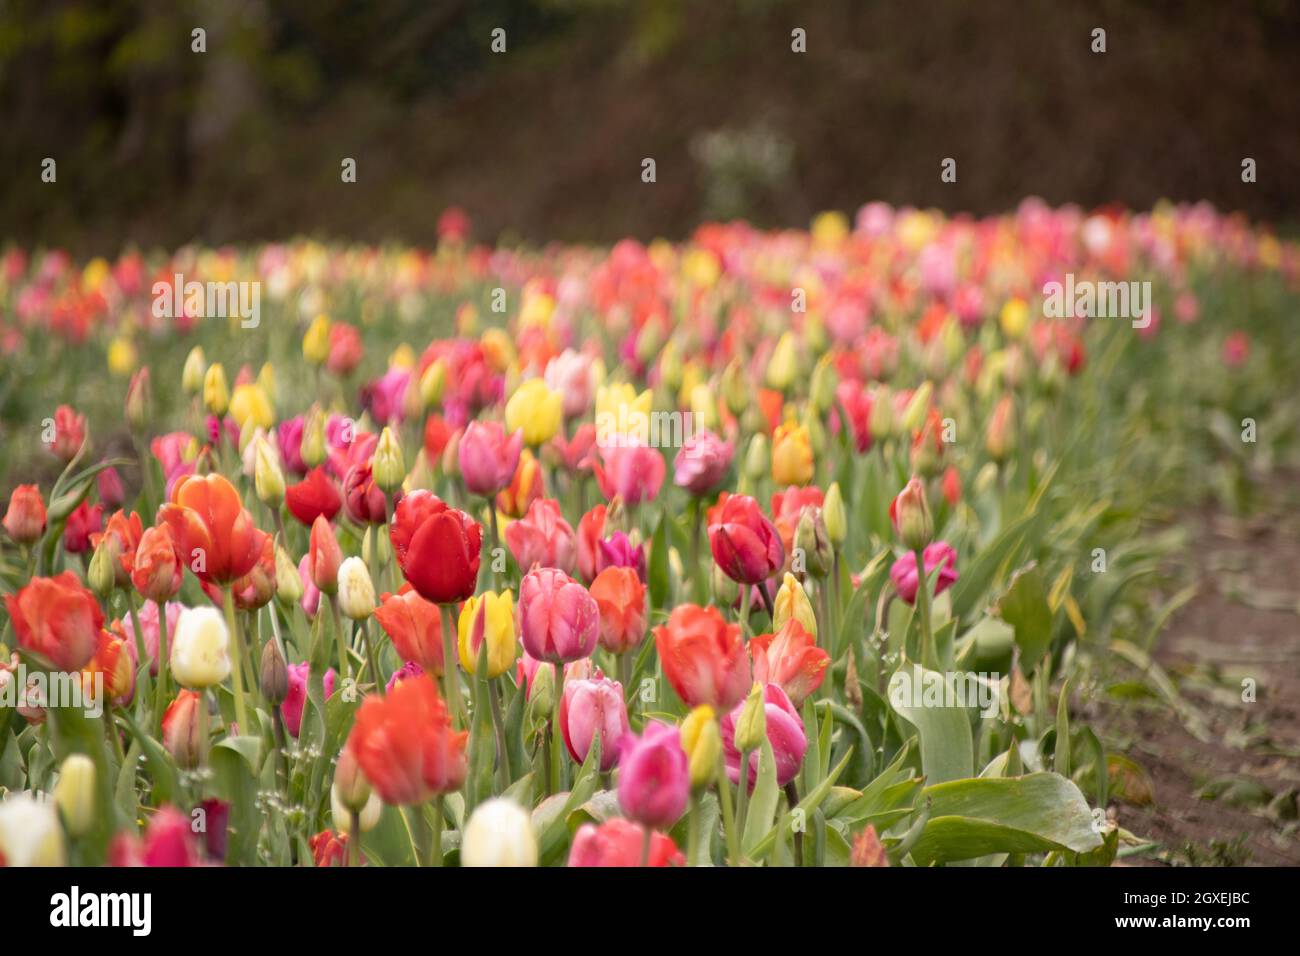 Netherland tulips field of red, yellow and purple flowers Stock Photo